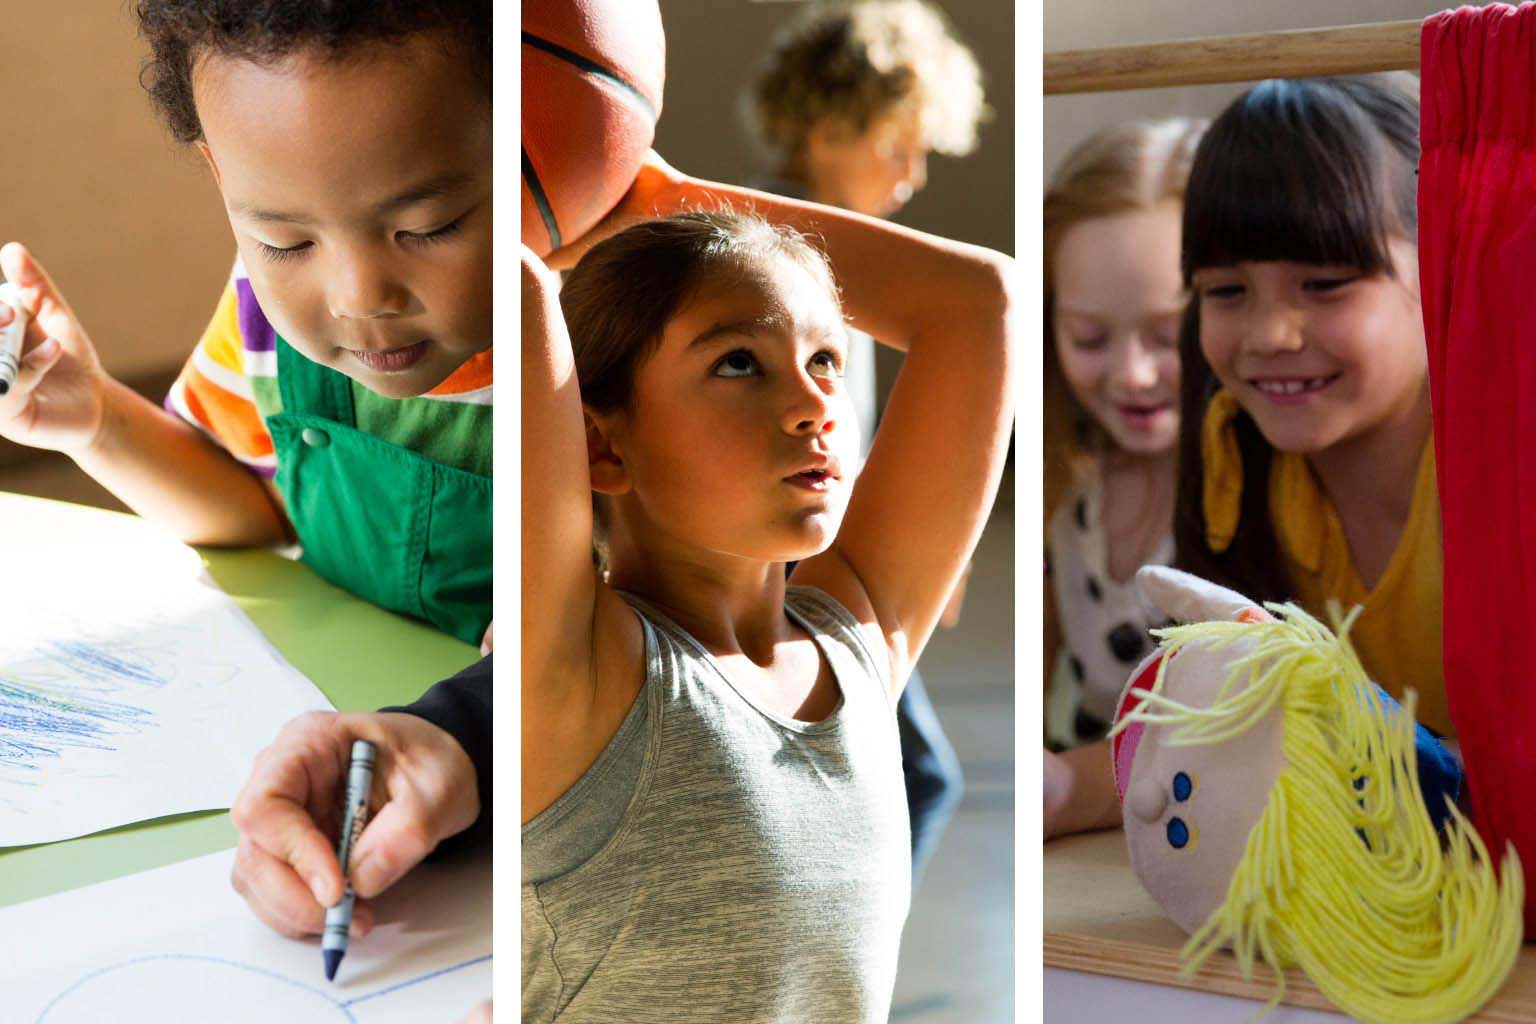 a collage of images showing a young boy drawing, a young girl shooting a basketball, and a young girl playing with a doll.